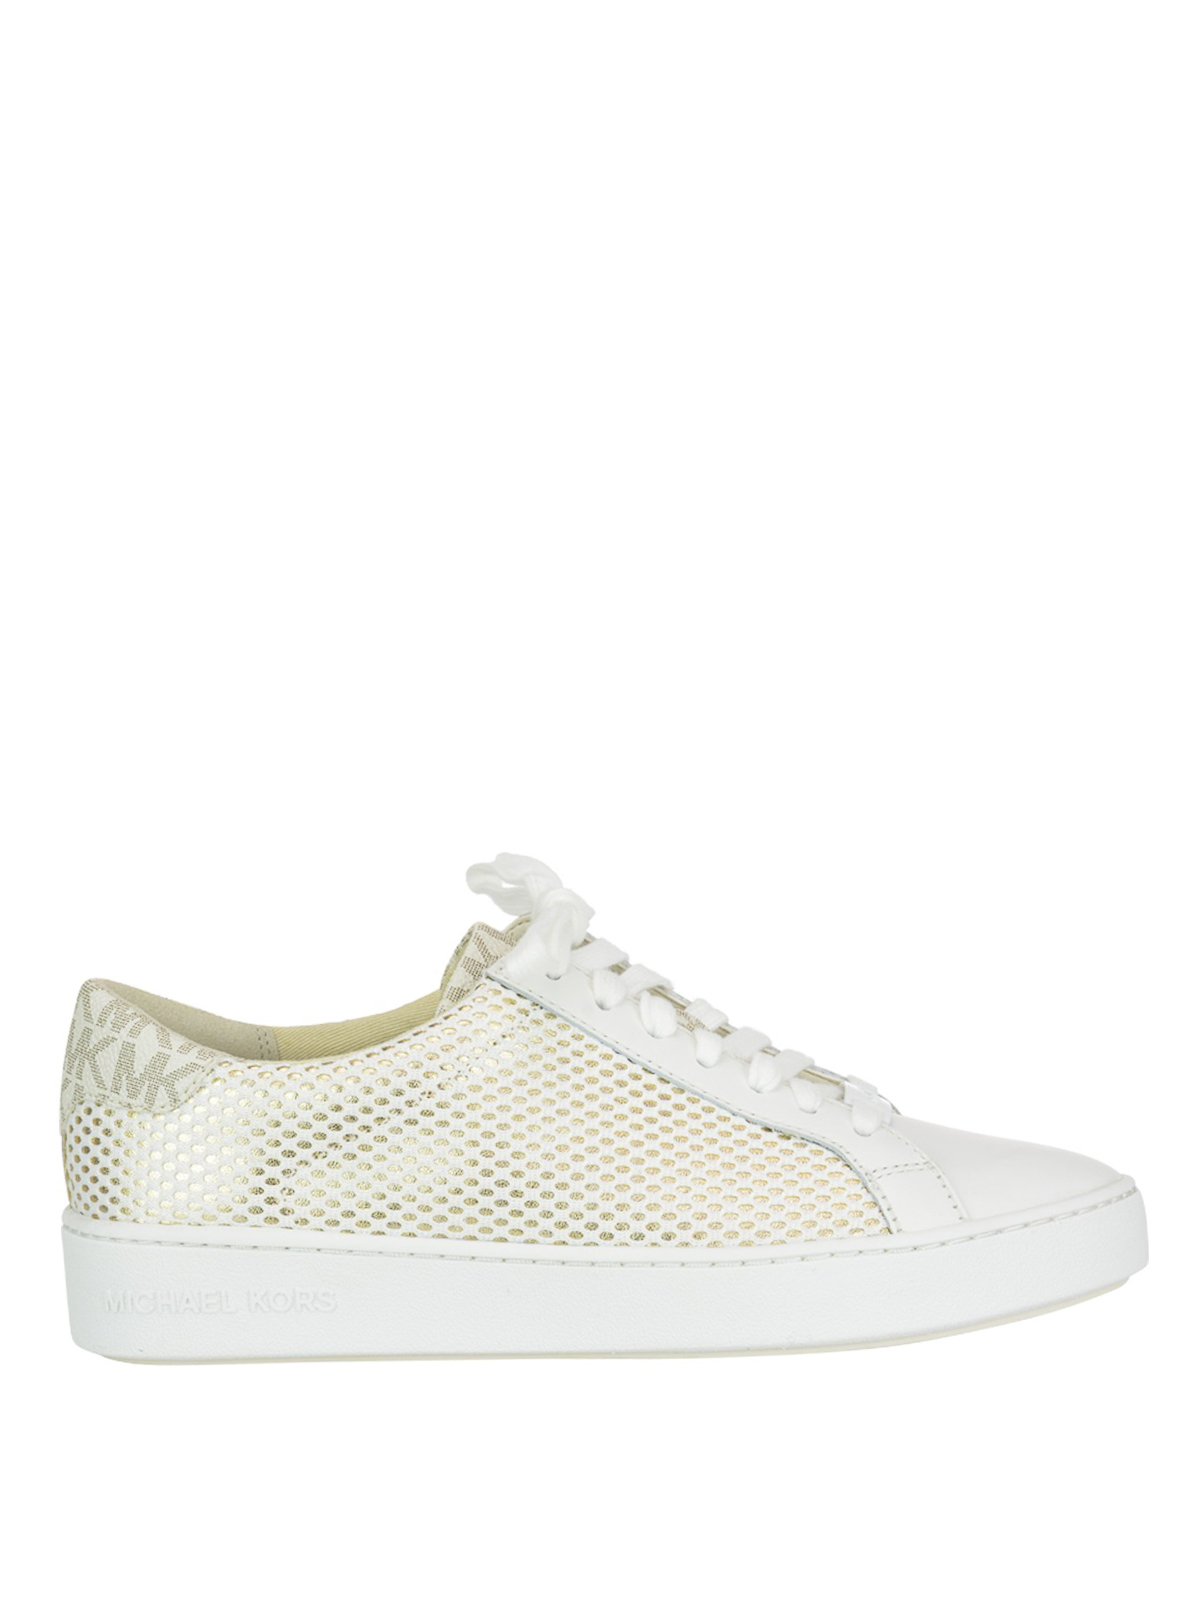 michael kors trainers white and gold